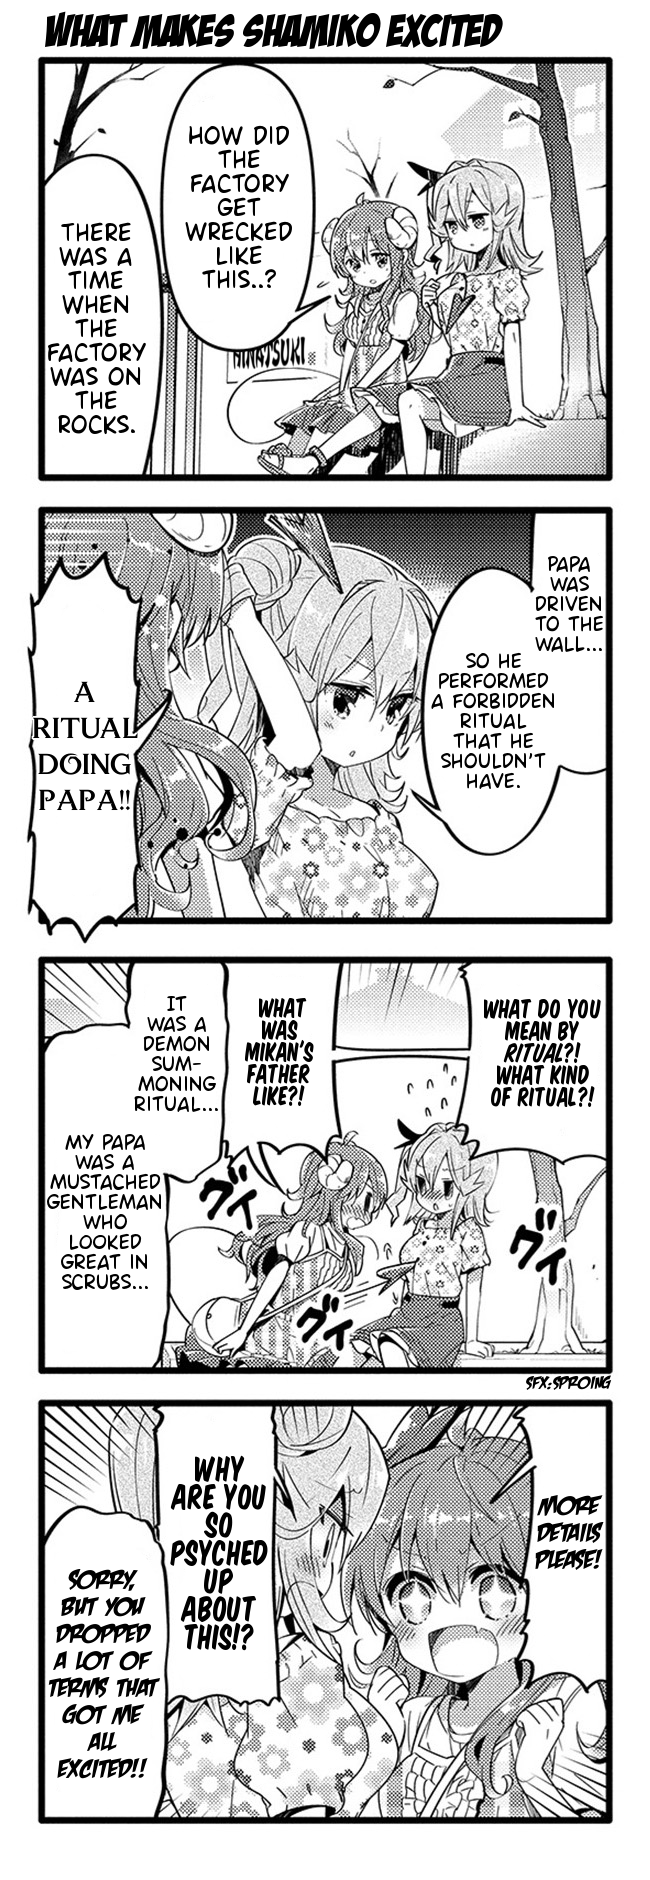 Machikado Mazoku Vol.3 Chapter 30: Ruins Search!! Problemed Mikan And Excited Demon - Picture 3